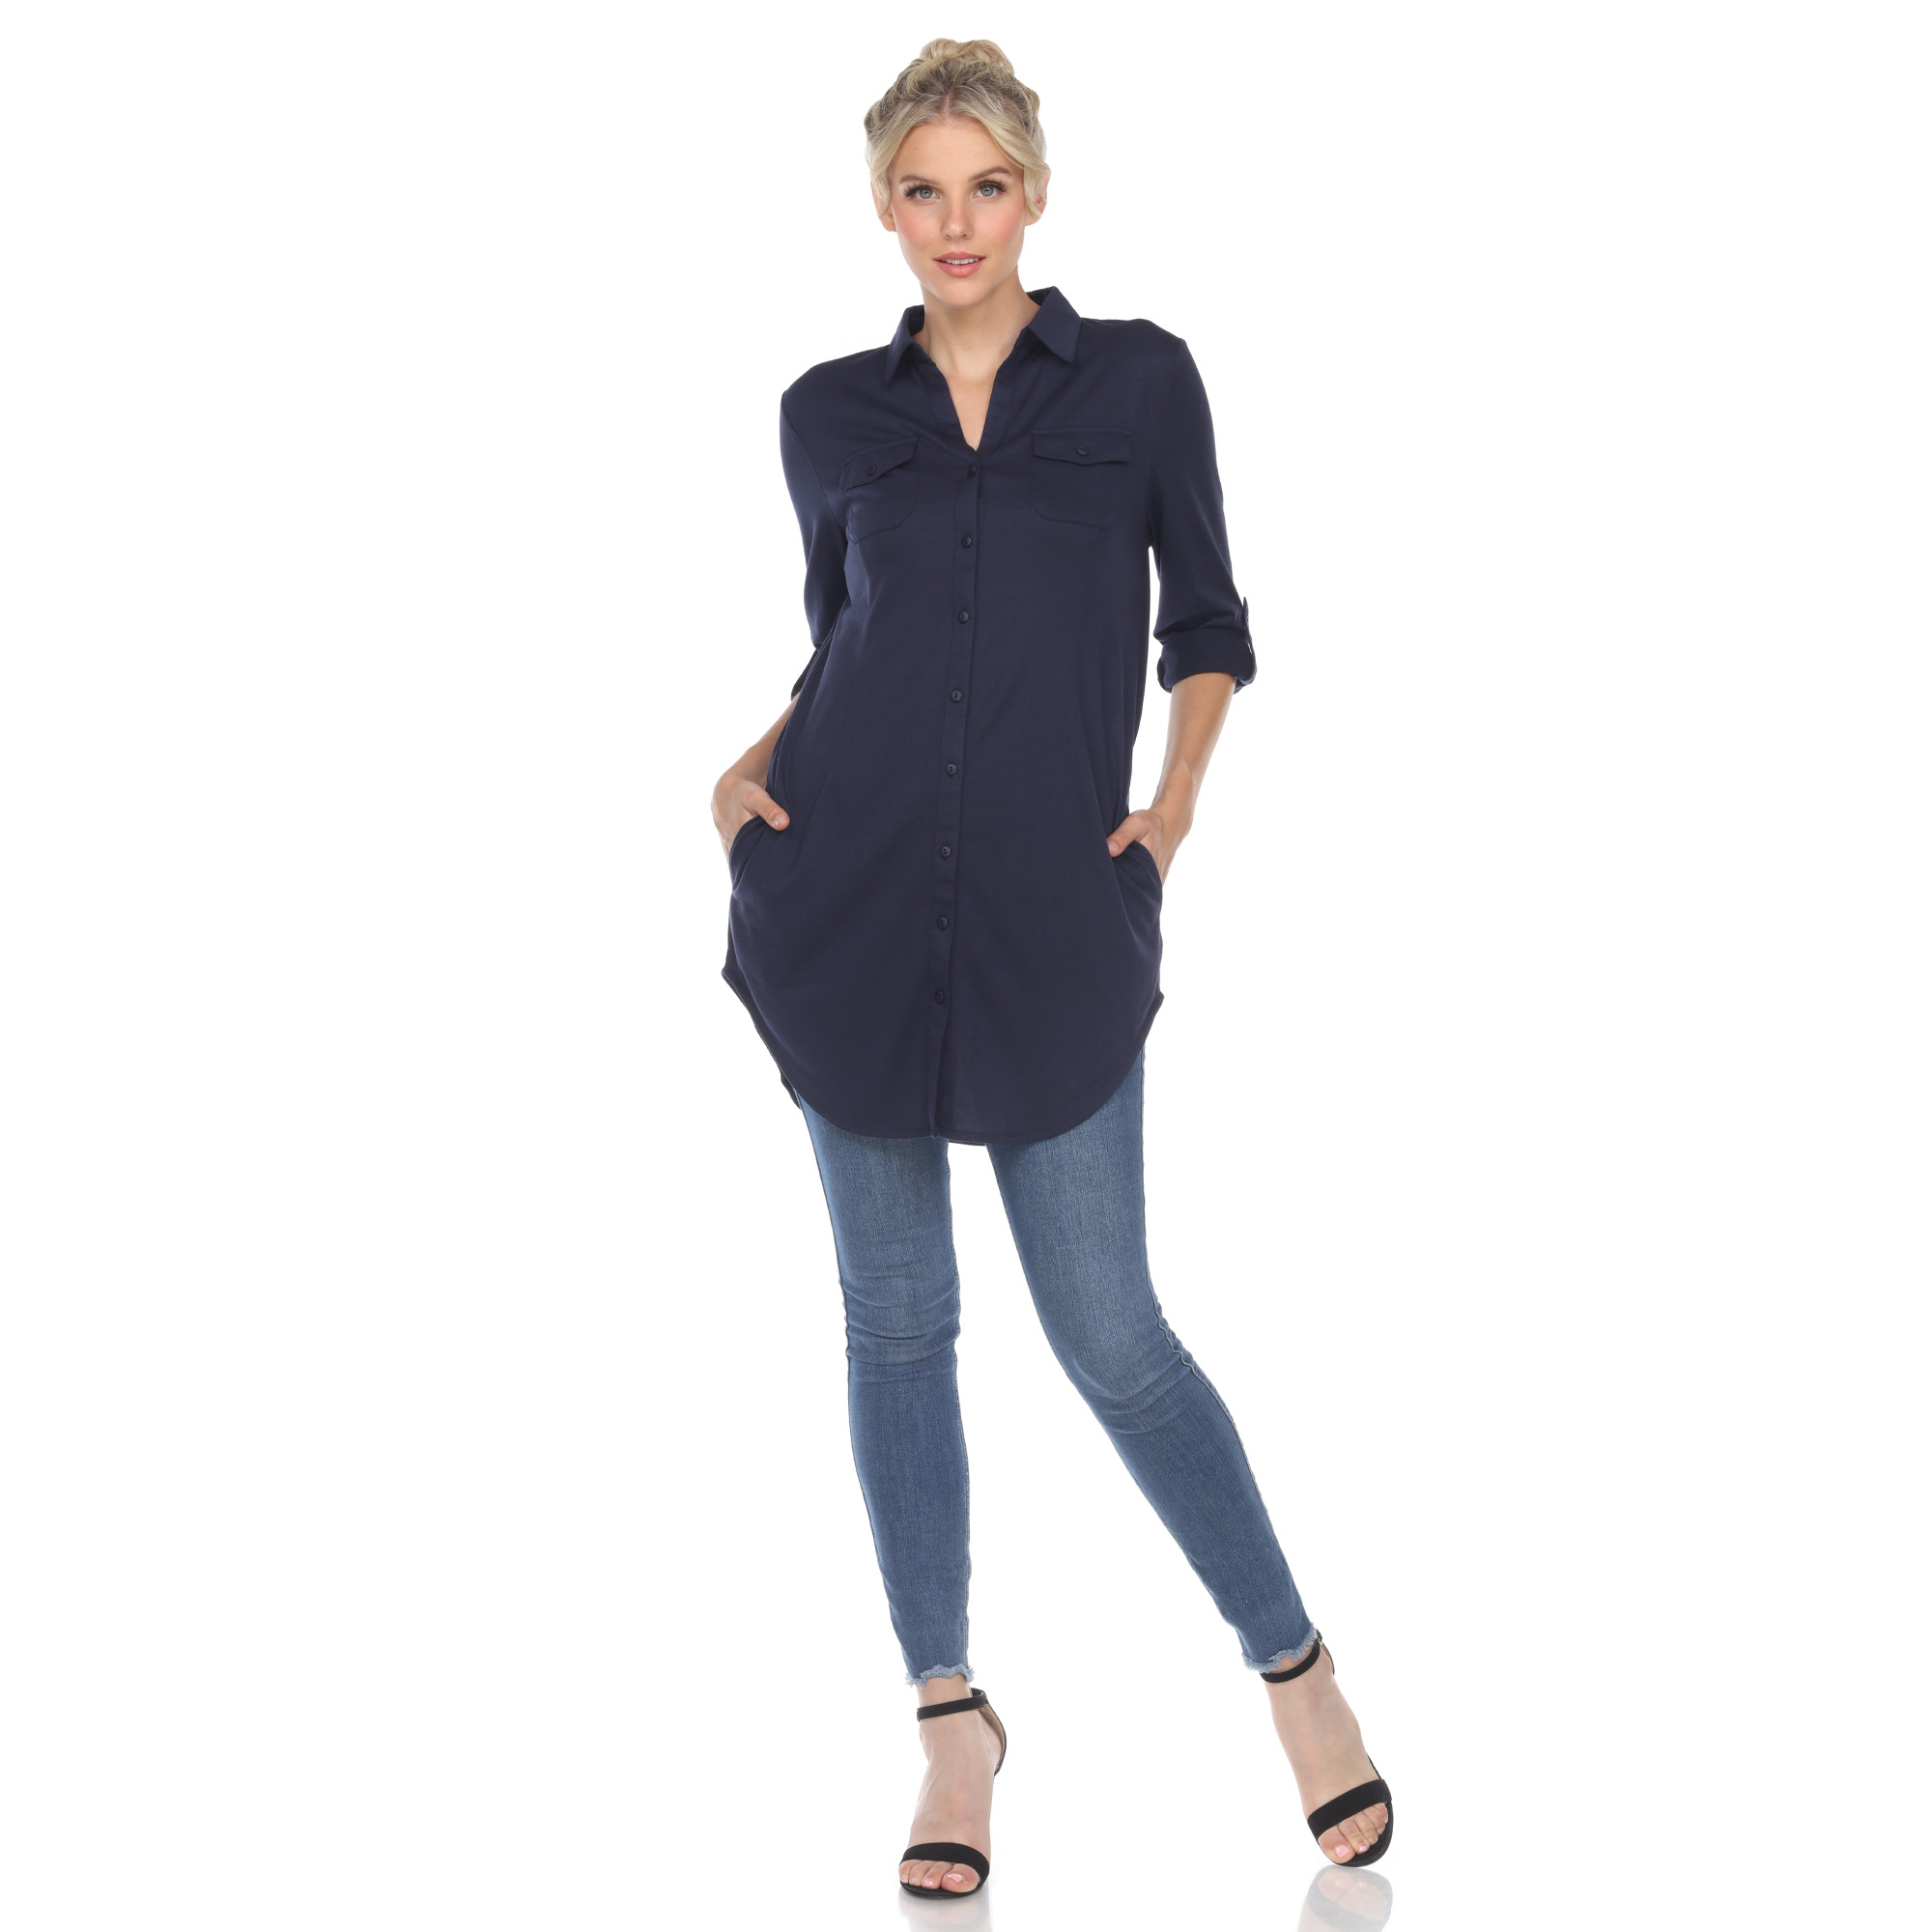 White Mark Women's Stretchy Quarter Sleeve Button Down Tunic Top With Pockets - Navy, Small